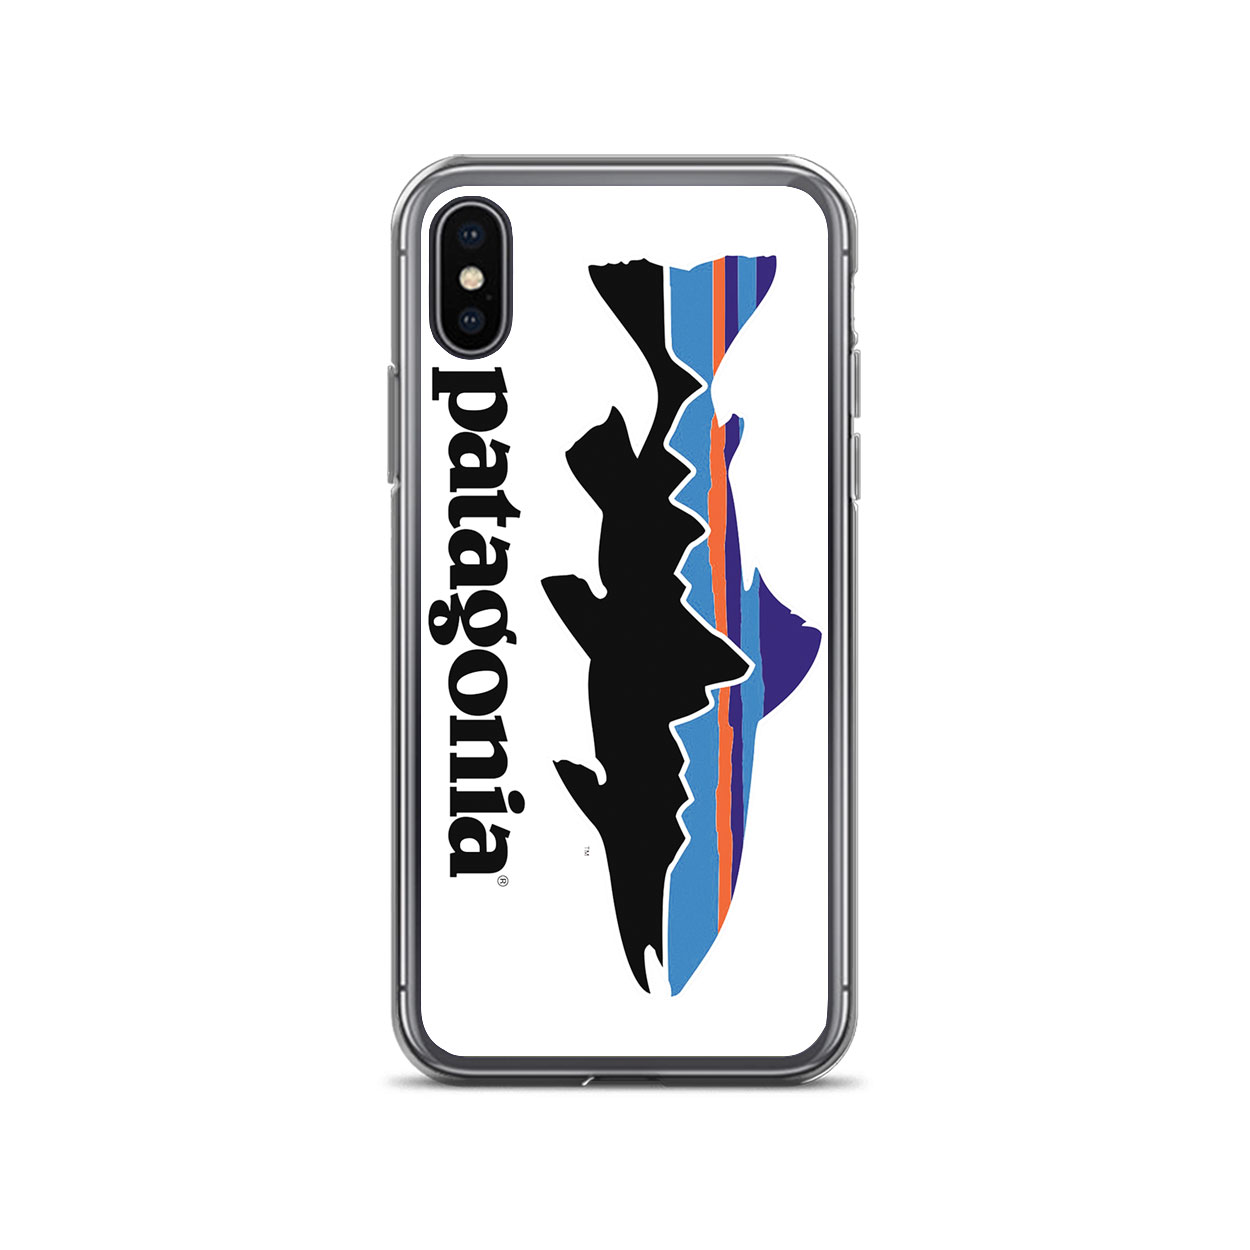 Patagonia Fishing Logo iPhone Case for XS/XS Max,XR,X,8/8 Plus,7/7Plus,6/6S